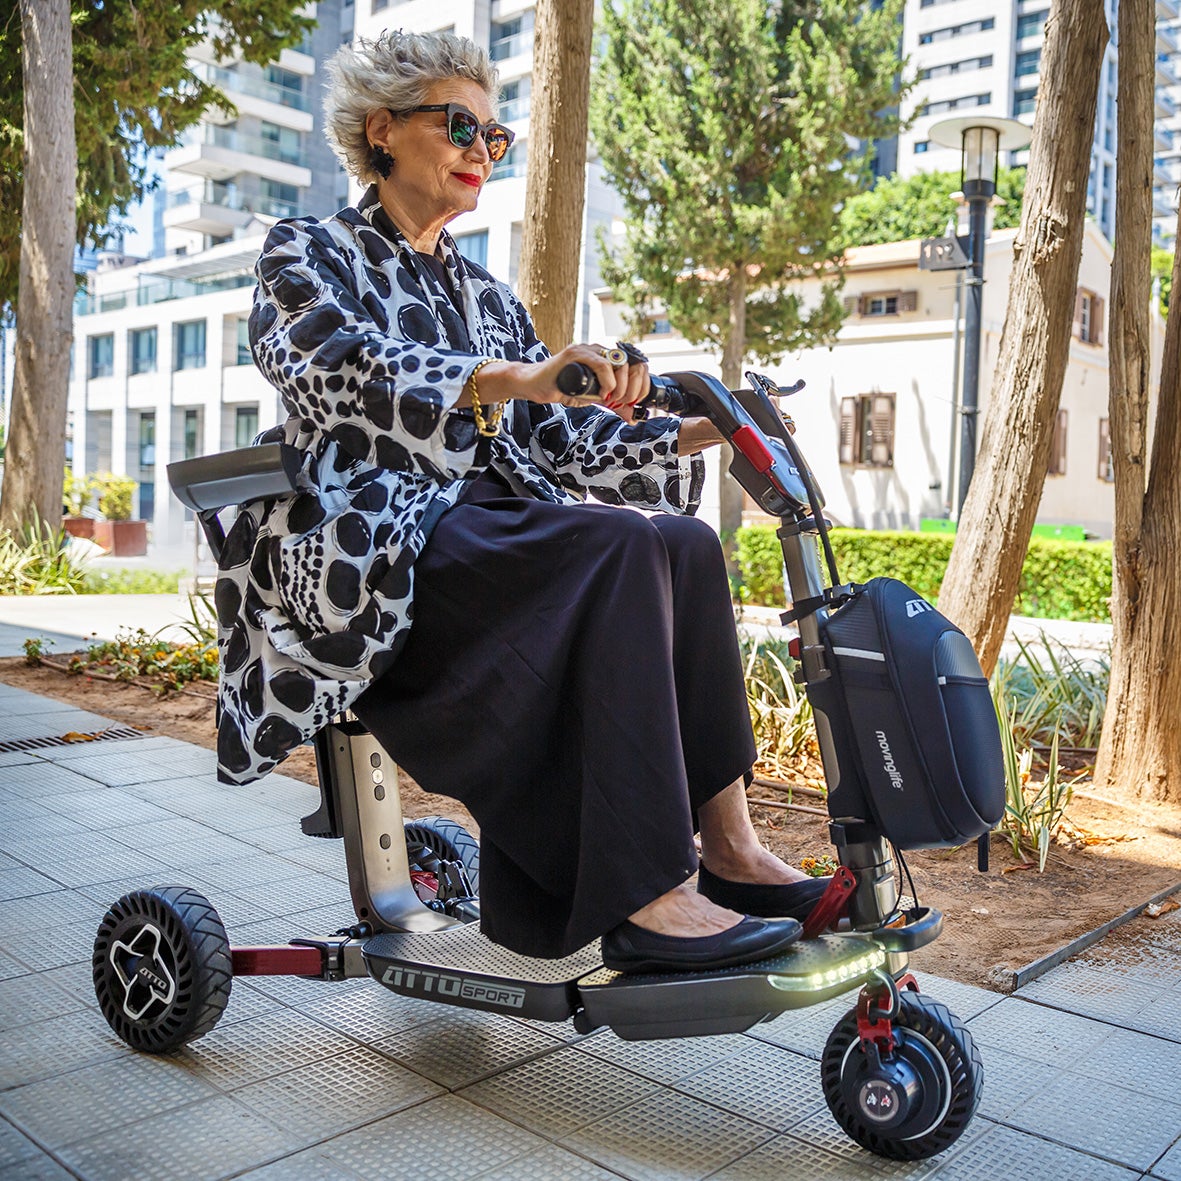 ATTO Mobility Scooter - Moving Life